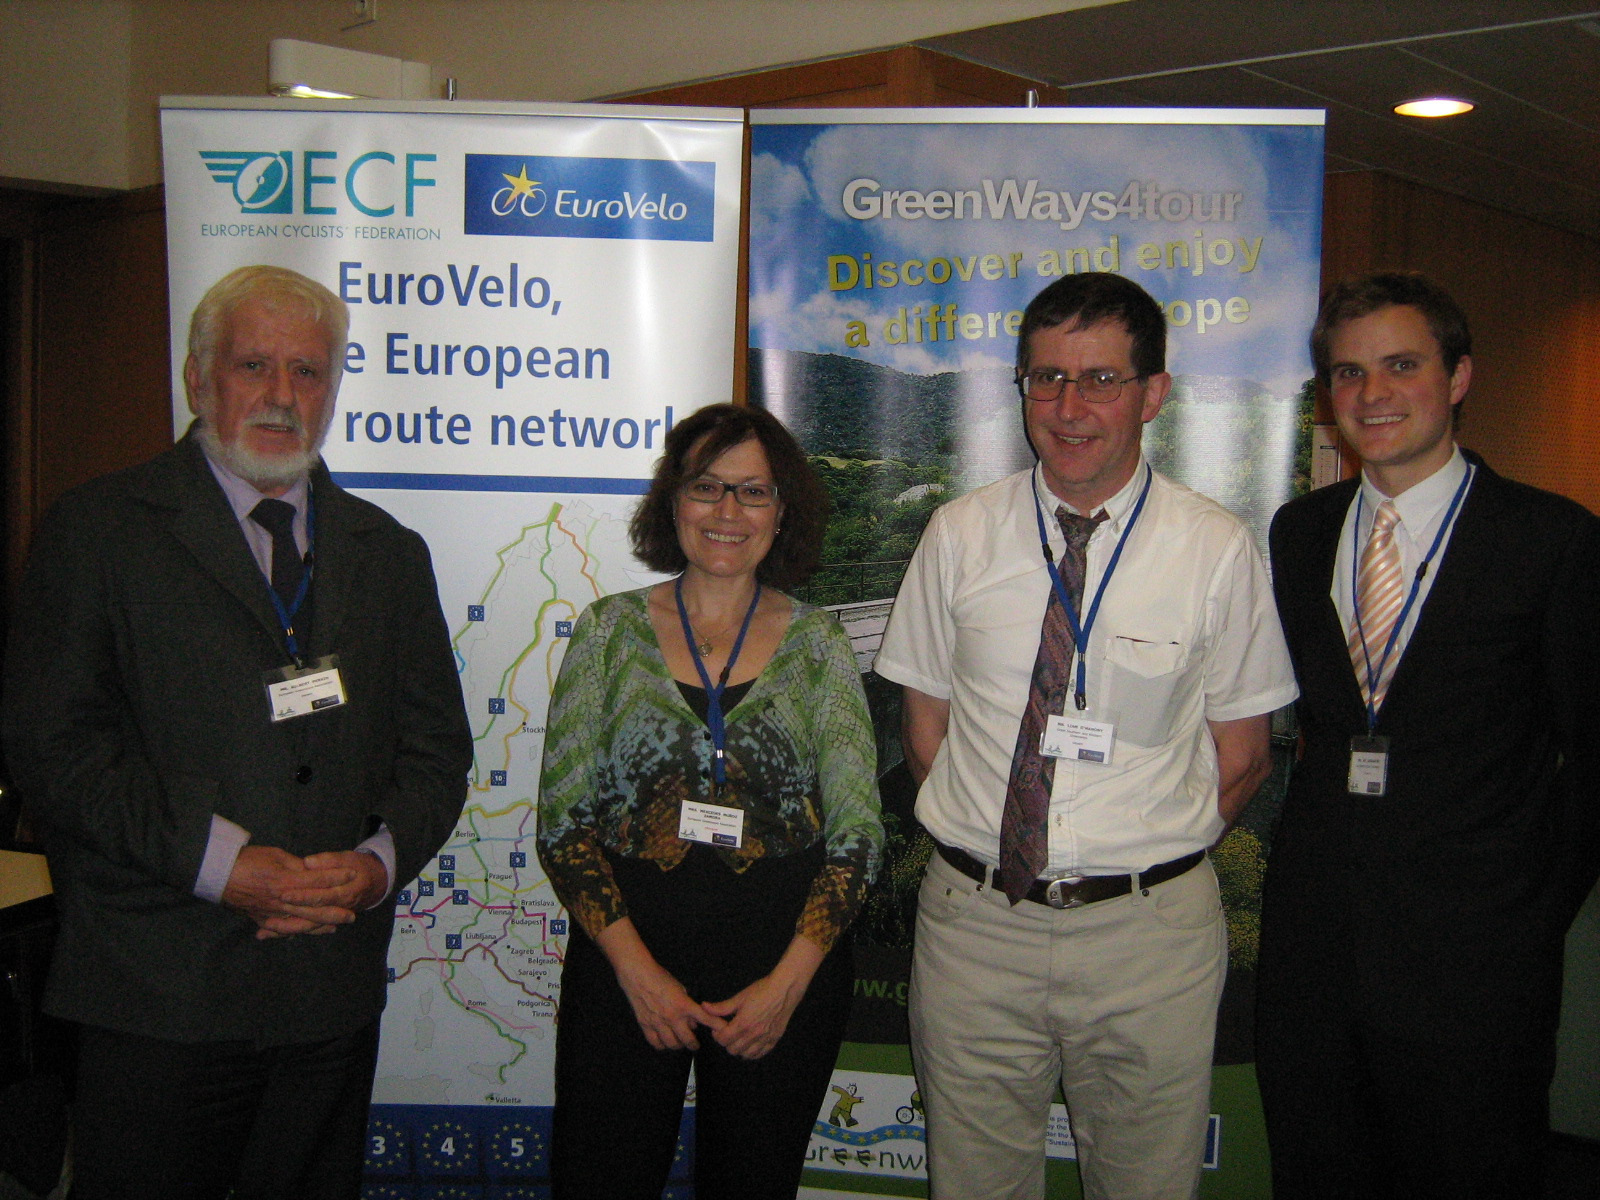 PHOTO CAPTION: At the Joint Conference of the European Cycling Federation( ECF) and the European Greenways Association(EGWA) held in the city of Nantes, France on Wednesday Sept. 26th 2012 were L.to R. M.Gilbert Perrin (Belgium), President, EGWA; Ms.Mercedes Munoz (Spain), Director, EGWA; Mr.Liam O'Mahony (Ireland), Cathaoirleach, Great Southern Trail and Mr. Ed. Lancaster (England), Regional Policy & Cycling Tourism Officer, ECF